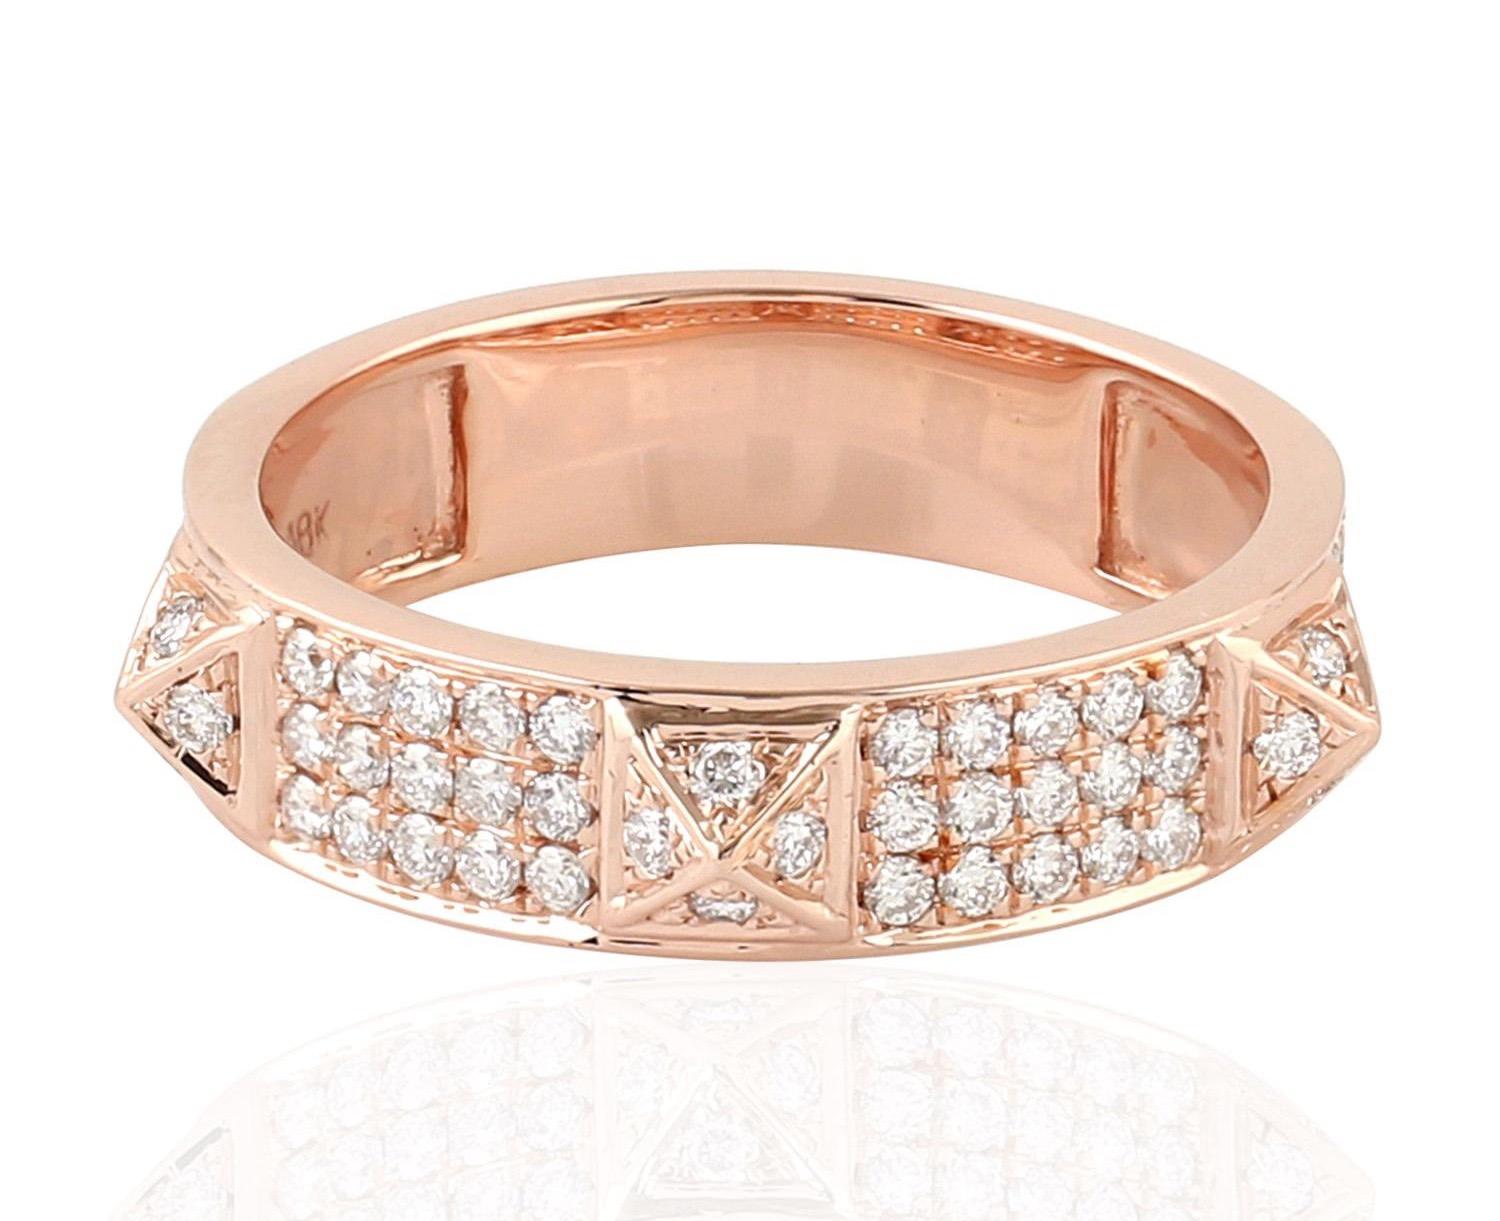 This ring has been meticulously crafted from 18-karat rose gold. Handcrafted in 0.5 carat sparkling diamonds. Also available in white & yellow gold.

The ring is a size 7 and may be resized to larger or smaller upon request. 
FOLLOW  MEGHNA JEWELS